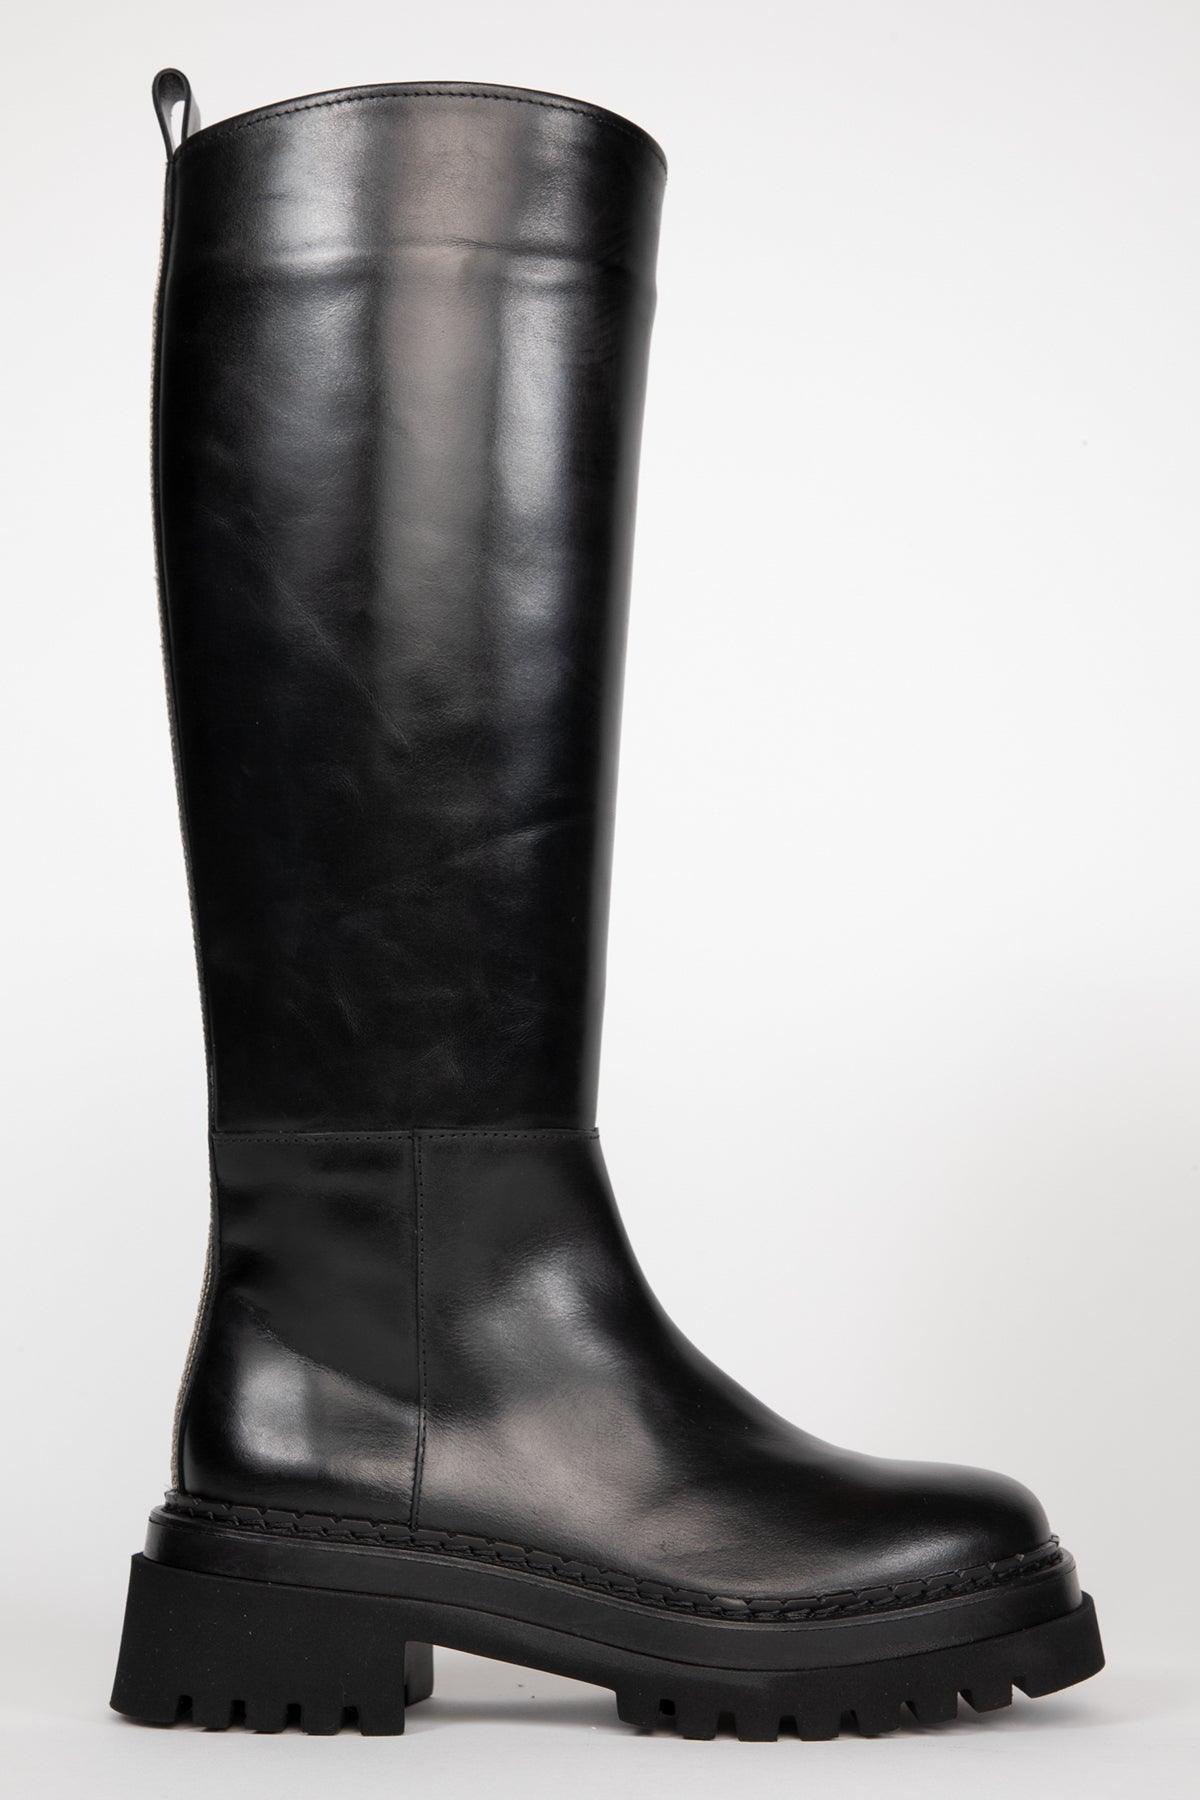 Golva Tall Boots by Homers